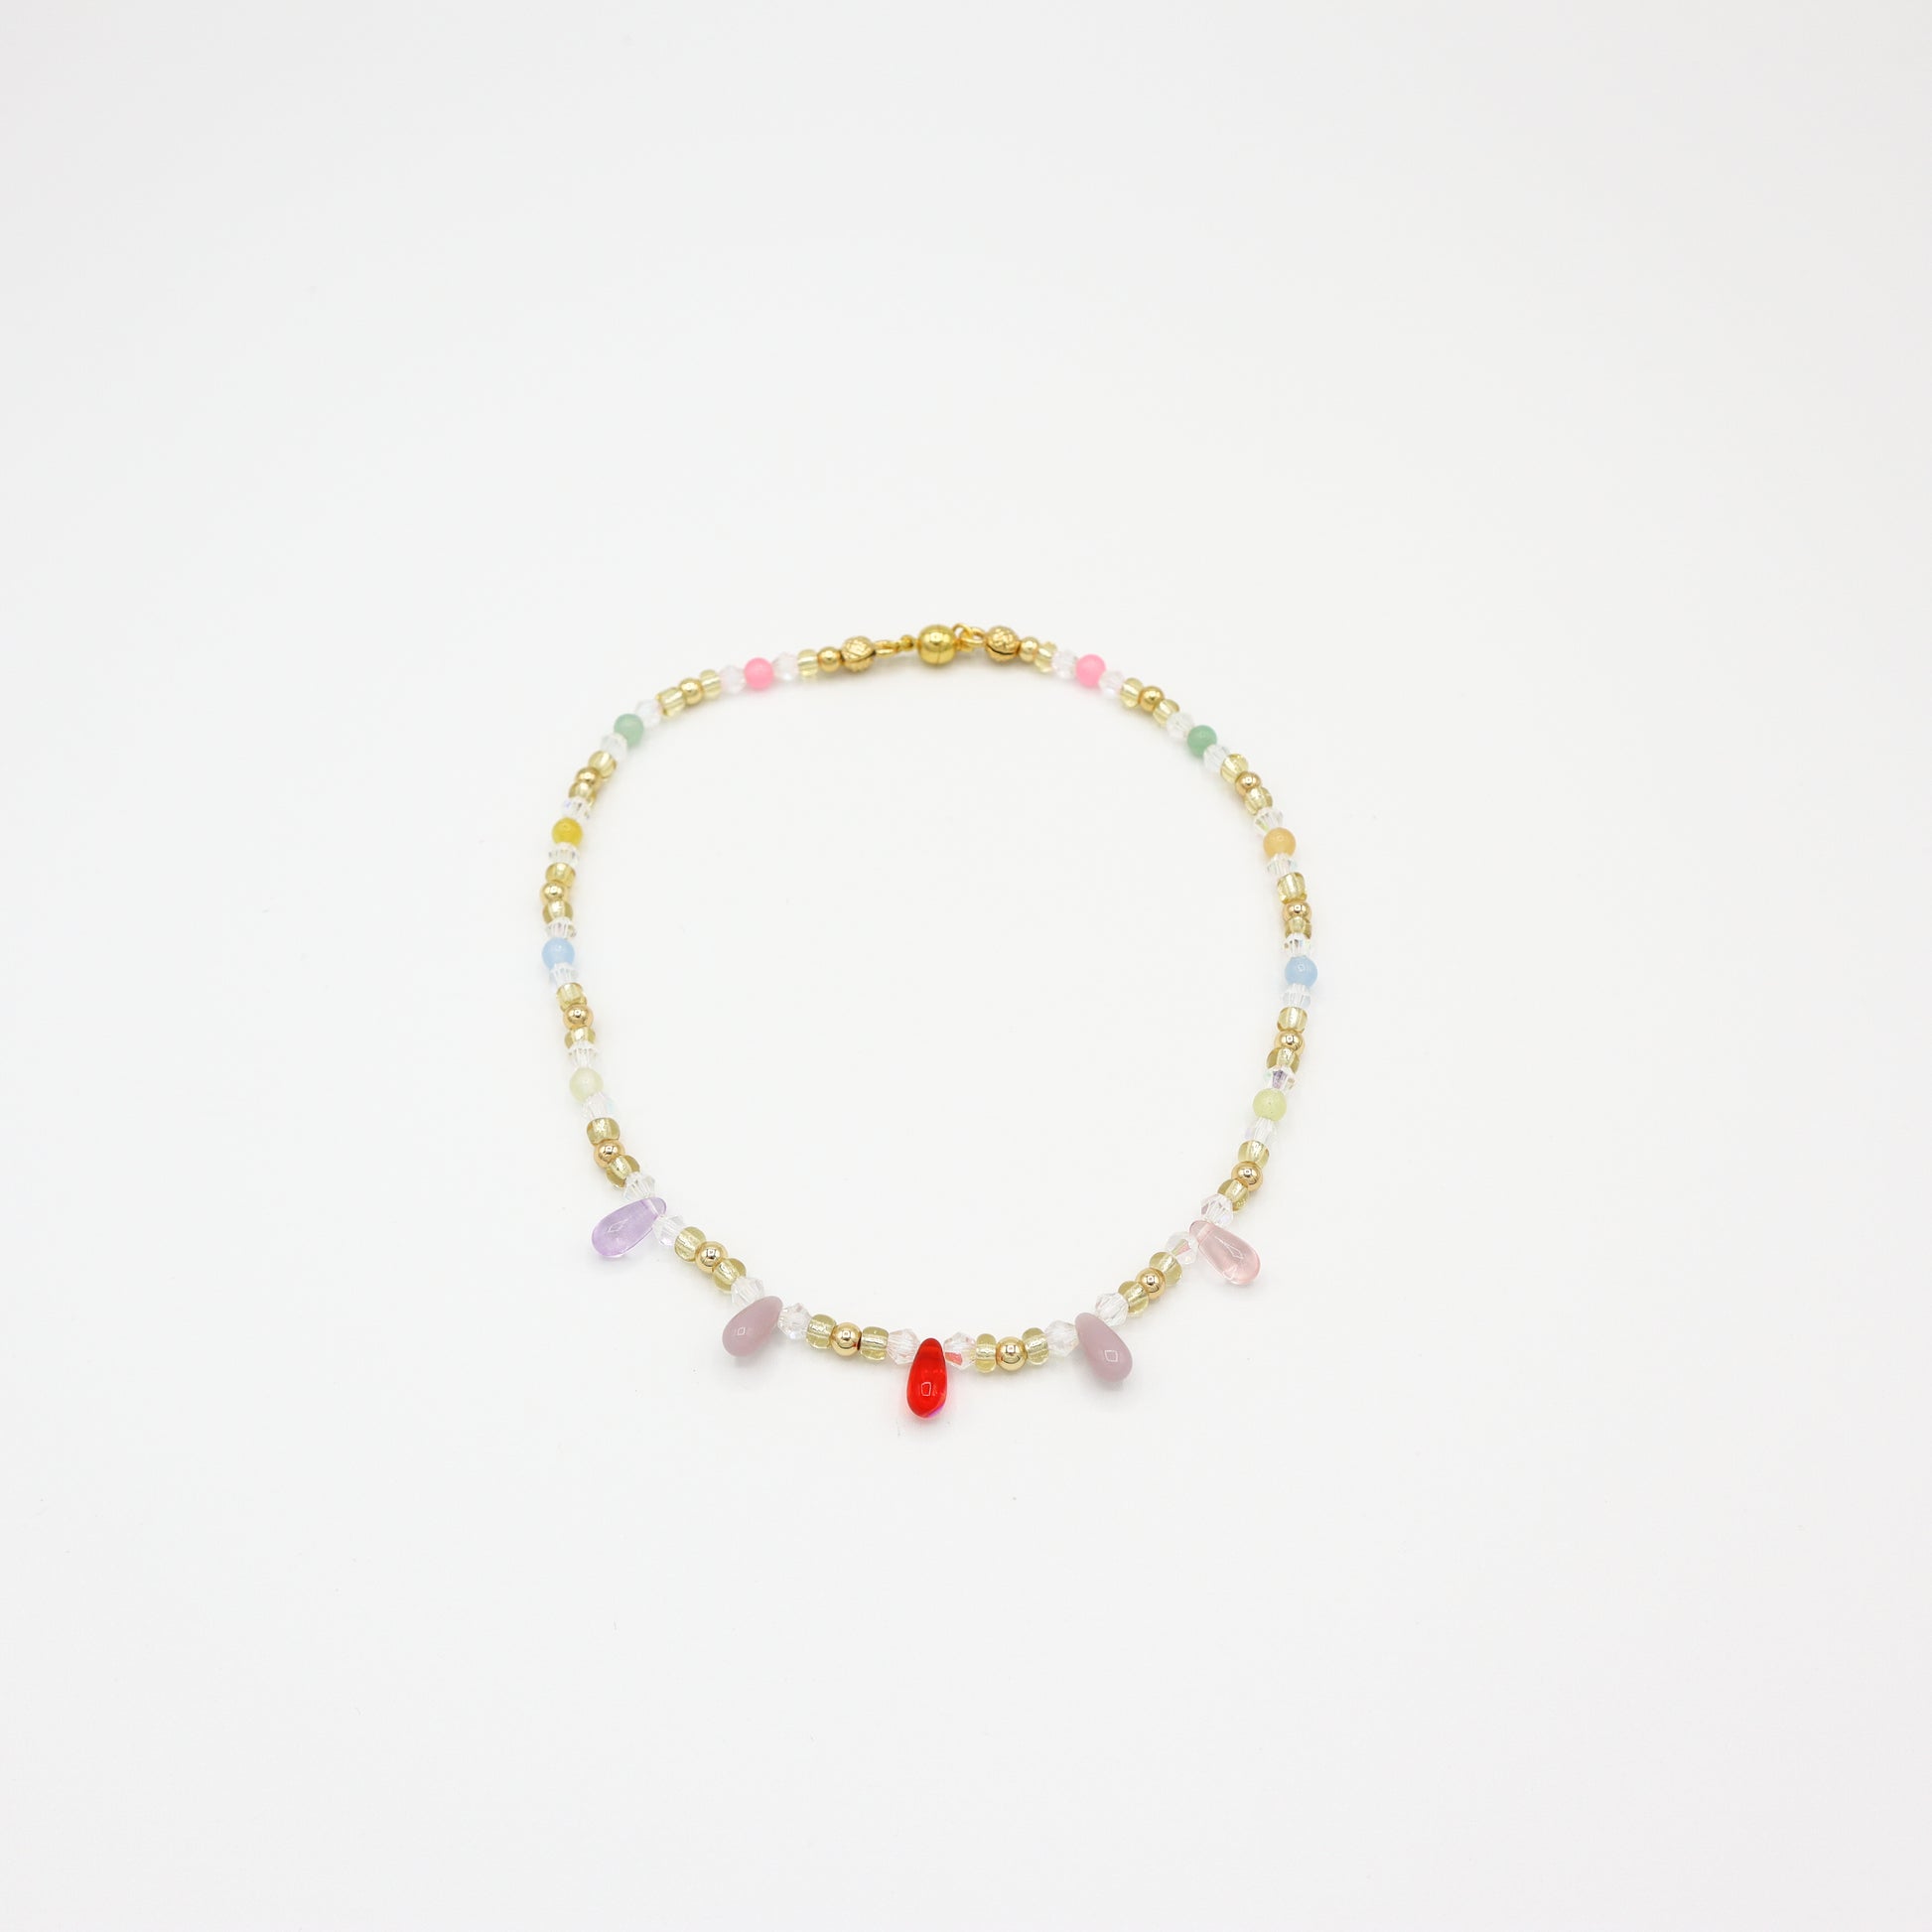 Roop Jewelry Aurora Choker. Colorful glass choker, made in Oakland, Ca. AAPI jewelry business. 